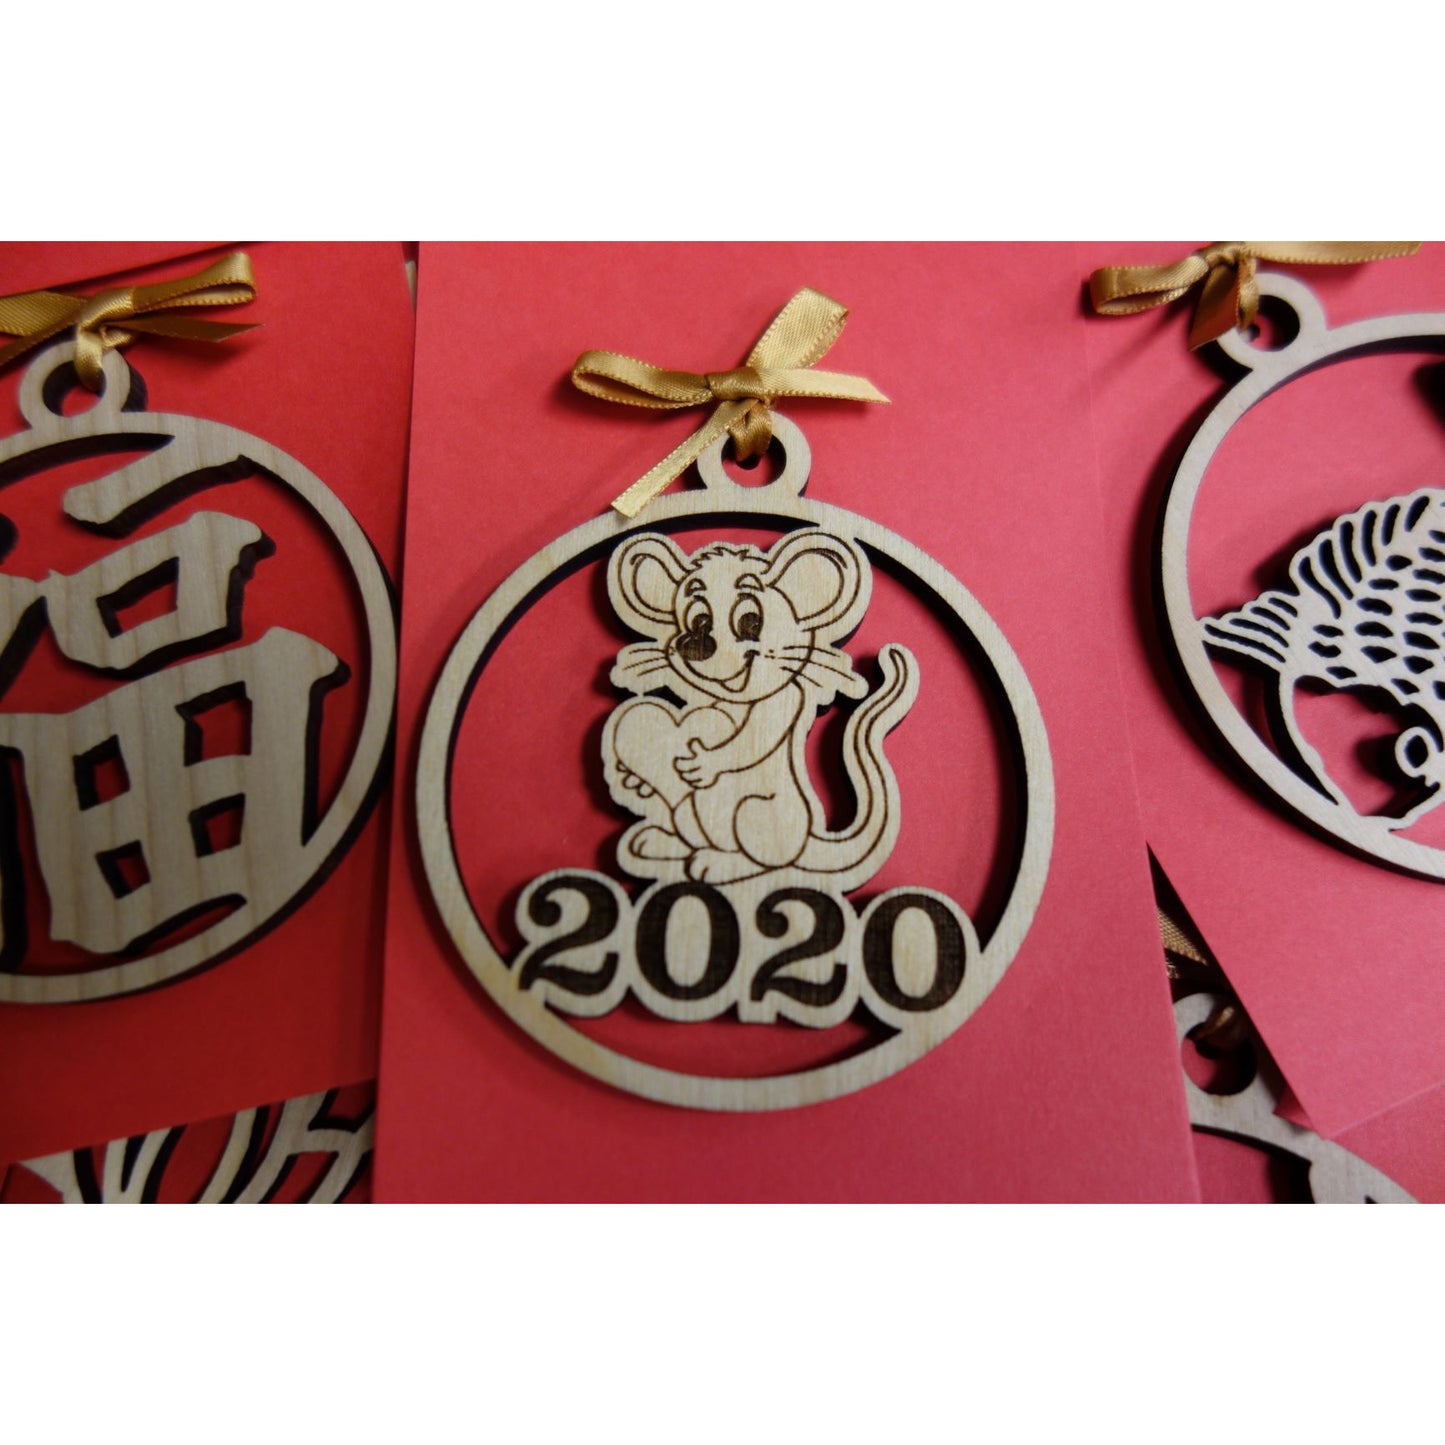 2020 Year of the Rat Ornament